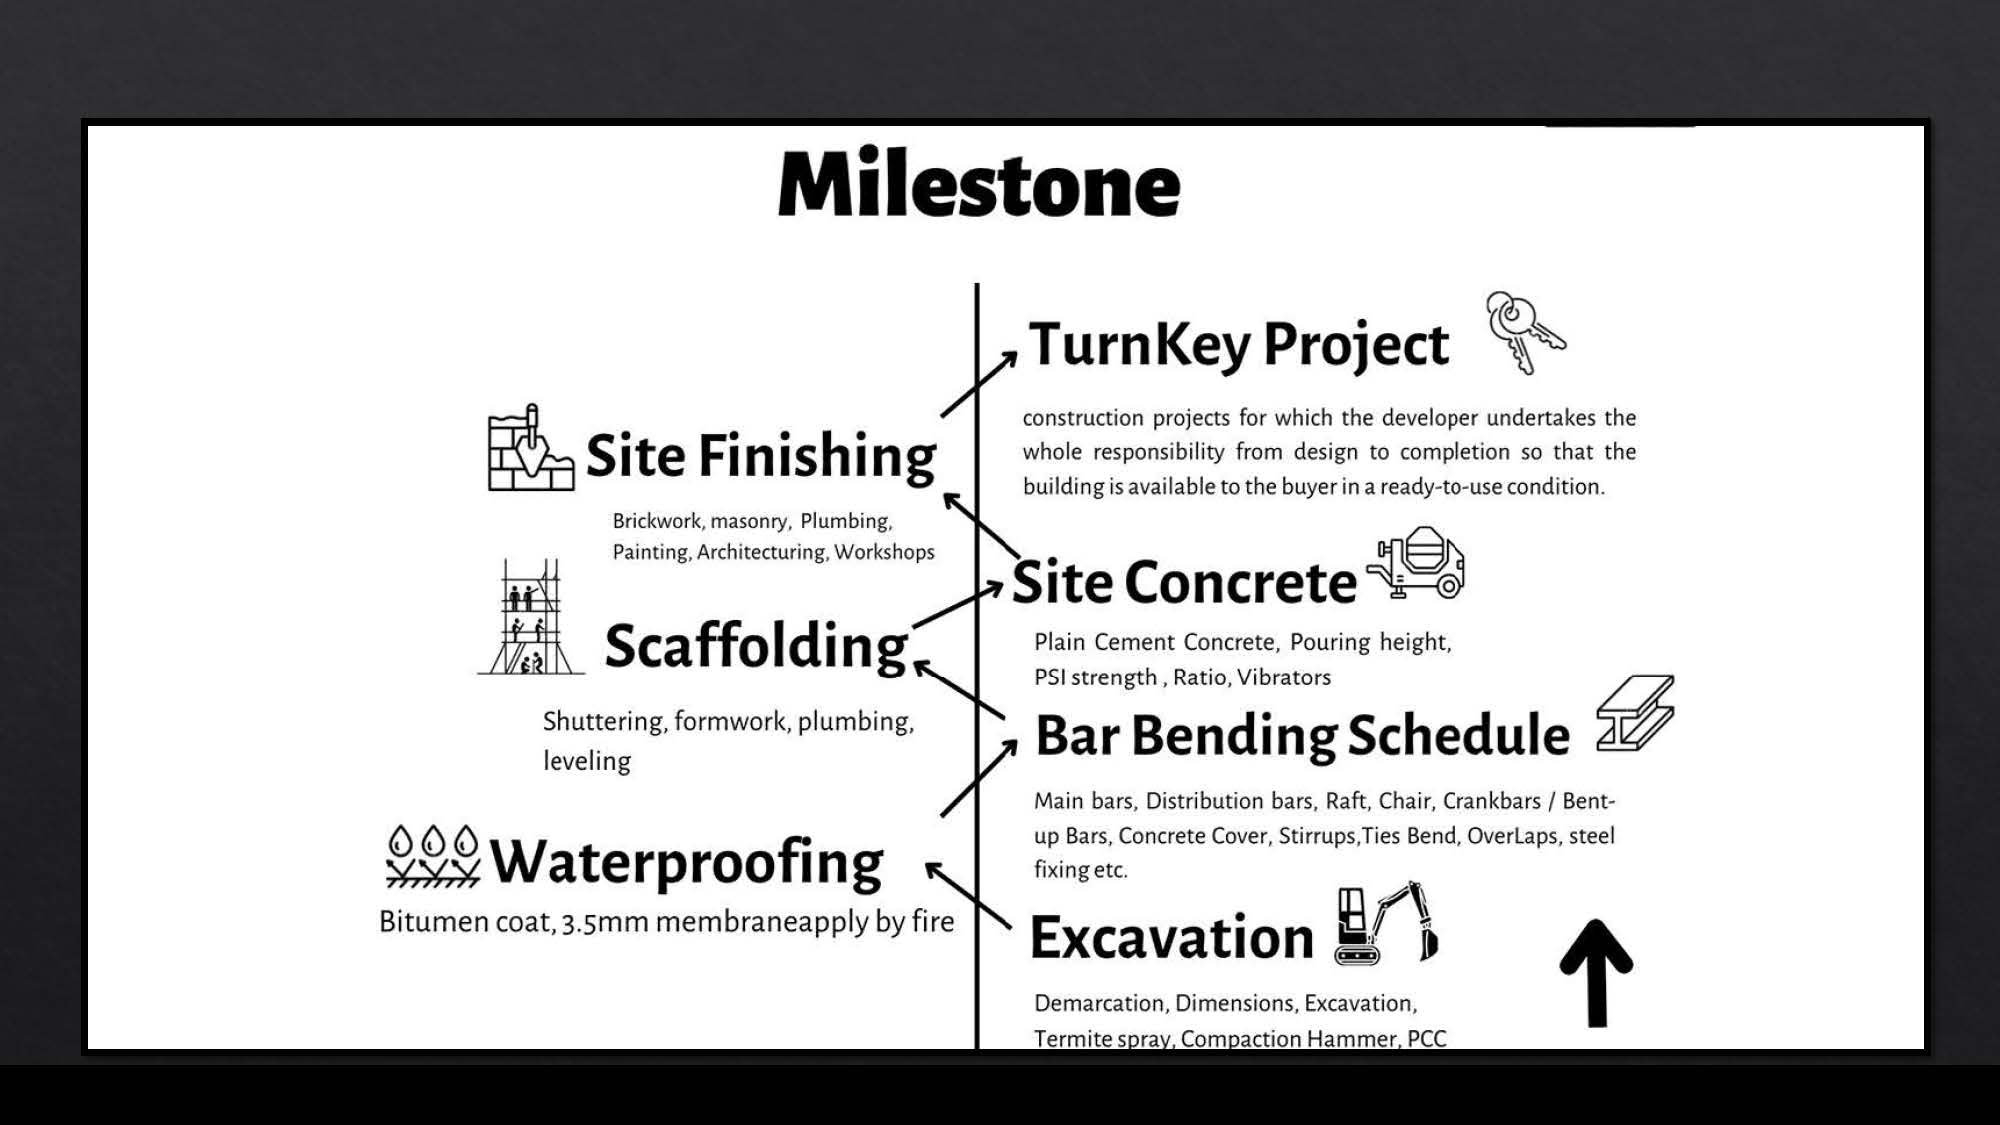 Milestone

.
TurnKey Project “&gt;
construction projects for which the developer undertakes the

. *« .
ol Site Fi nishing whole responsibility from design to completion so that the

building is available to the buyer in a ready-to-use condition

Brickwork, masonry, Plumbing,
Painting, Architecturing, Workshops

. EN
Site Concrete
Scaffoldi ng Ran Cement Concrete, Pouring height,
Sl strength , Ratio, Vibrators
Shuttering, formwork, plumbing, Bar Bending Schedule <b></b>